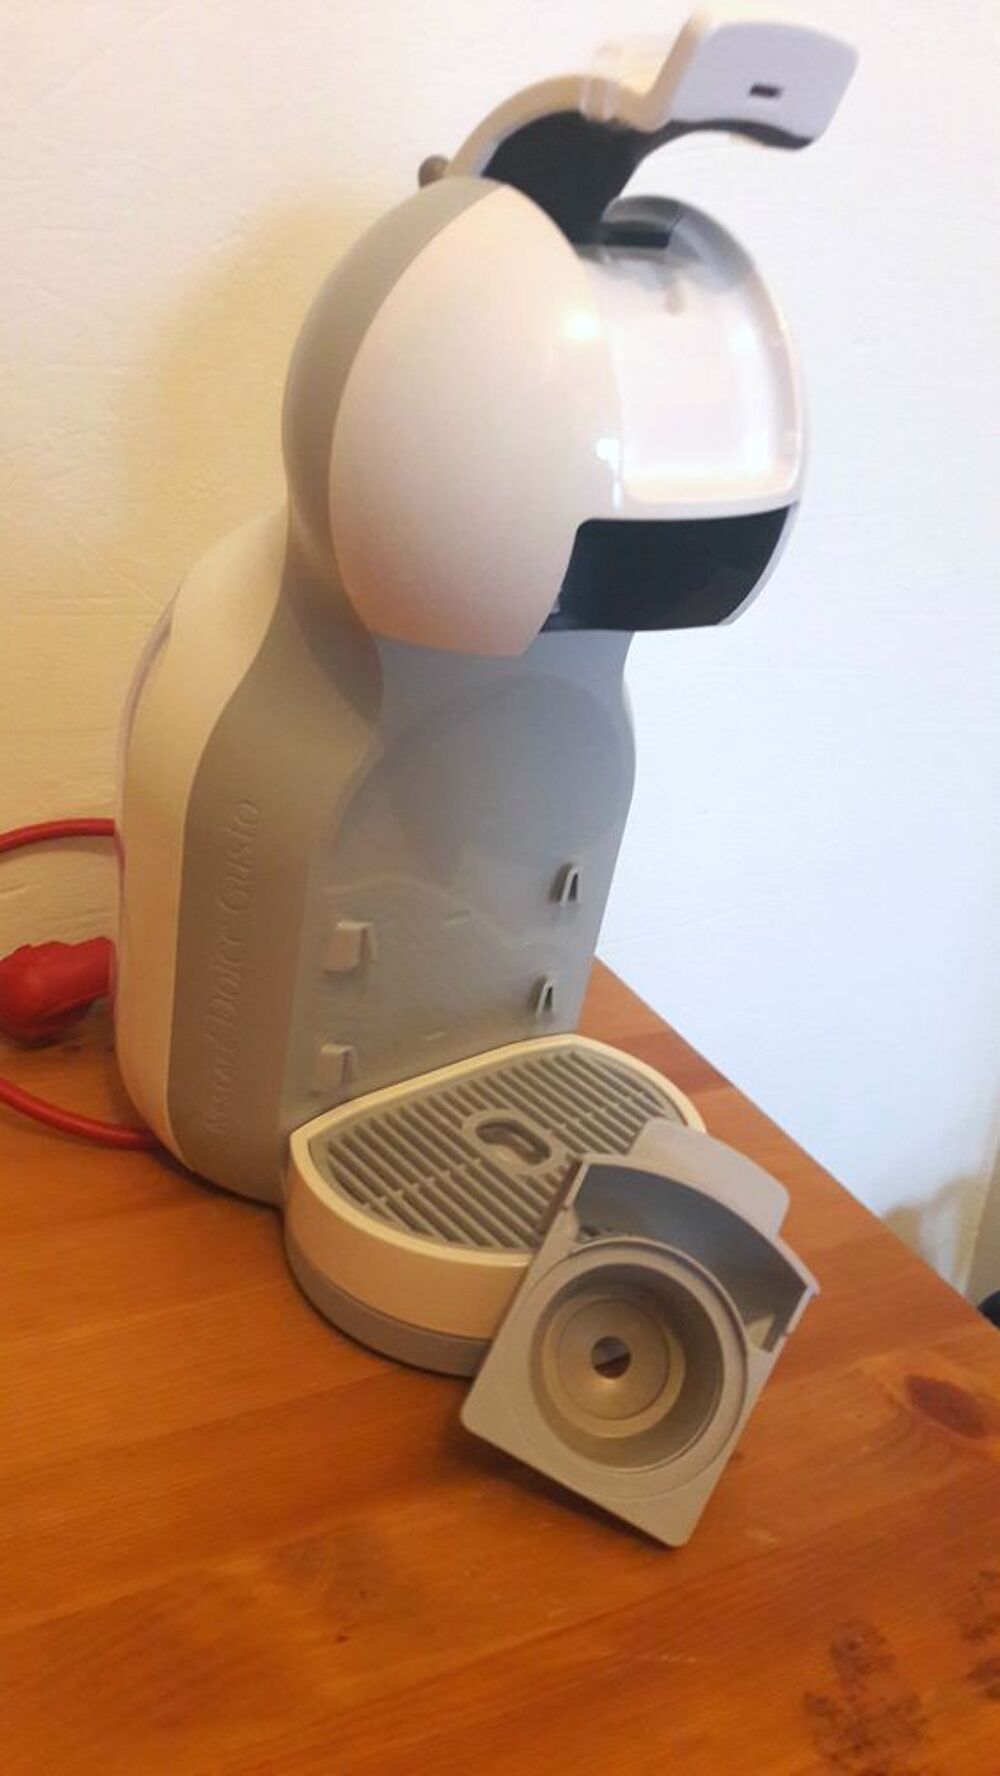 Machine &agrave; caf&eacute; Nescaf&eacute; Dolce Gusto Electromnager